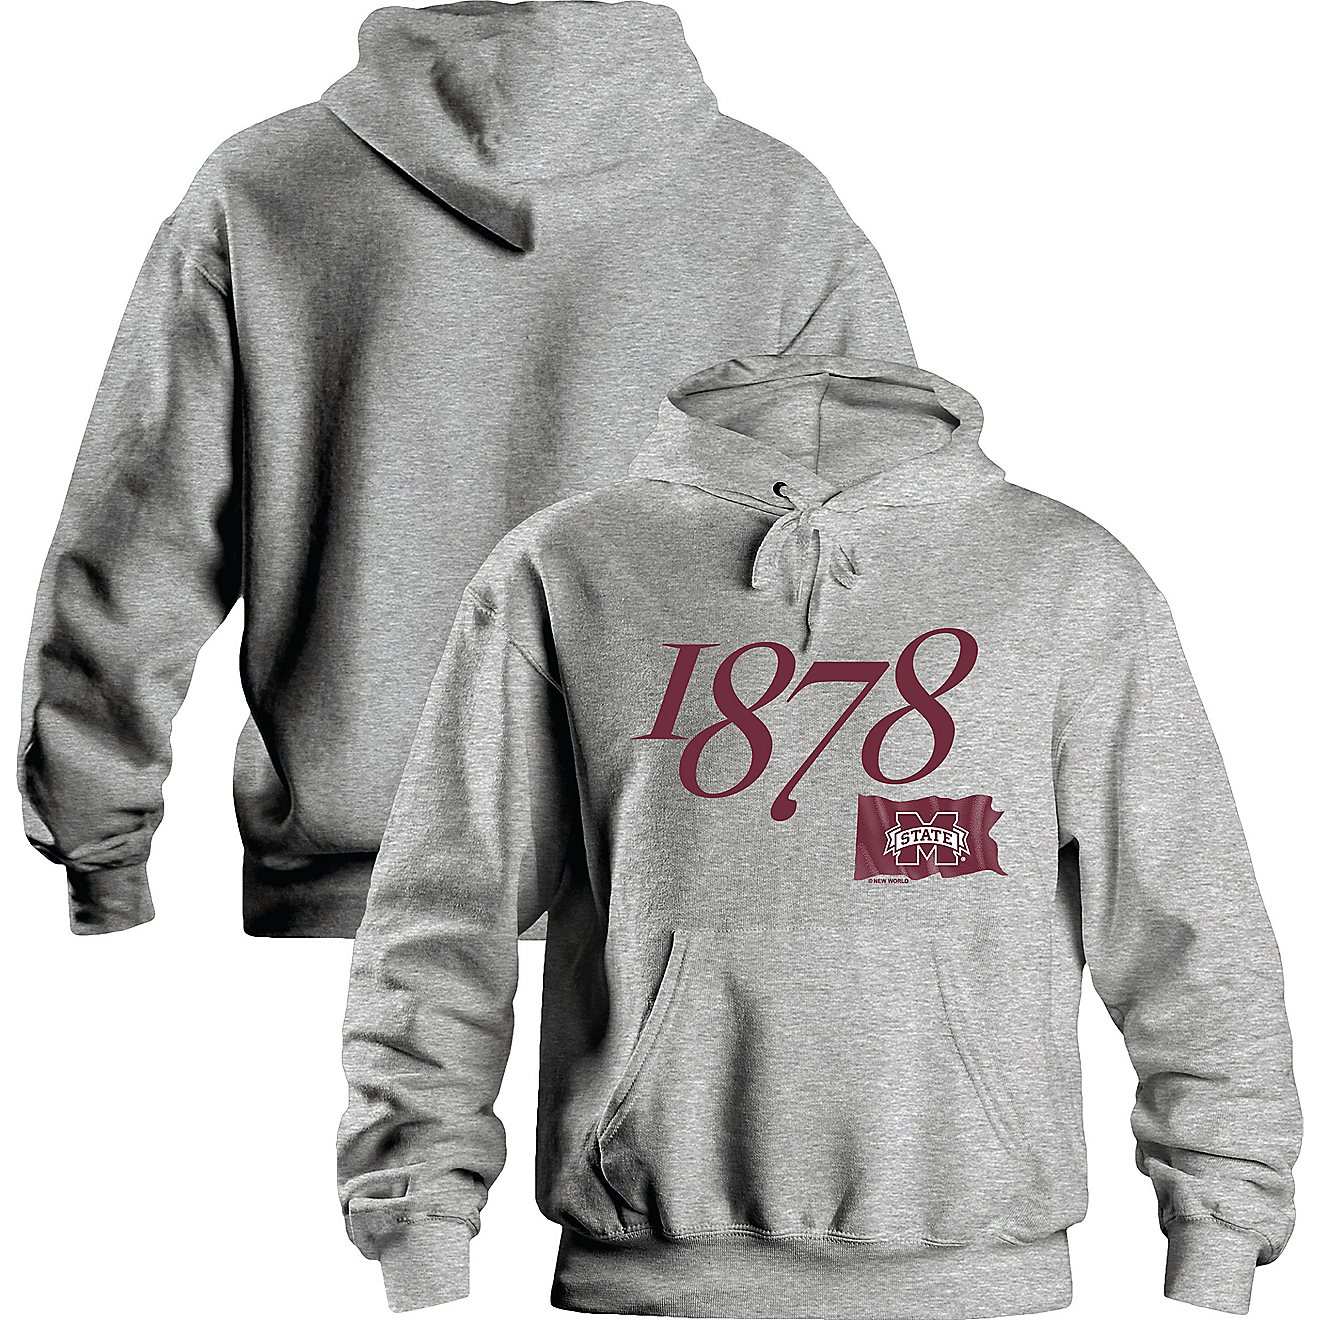 New World Graphics Men's Mississippi State University Founding Hoodie                                                            - view number 1